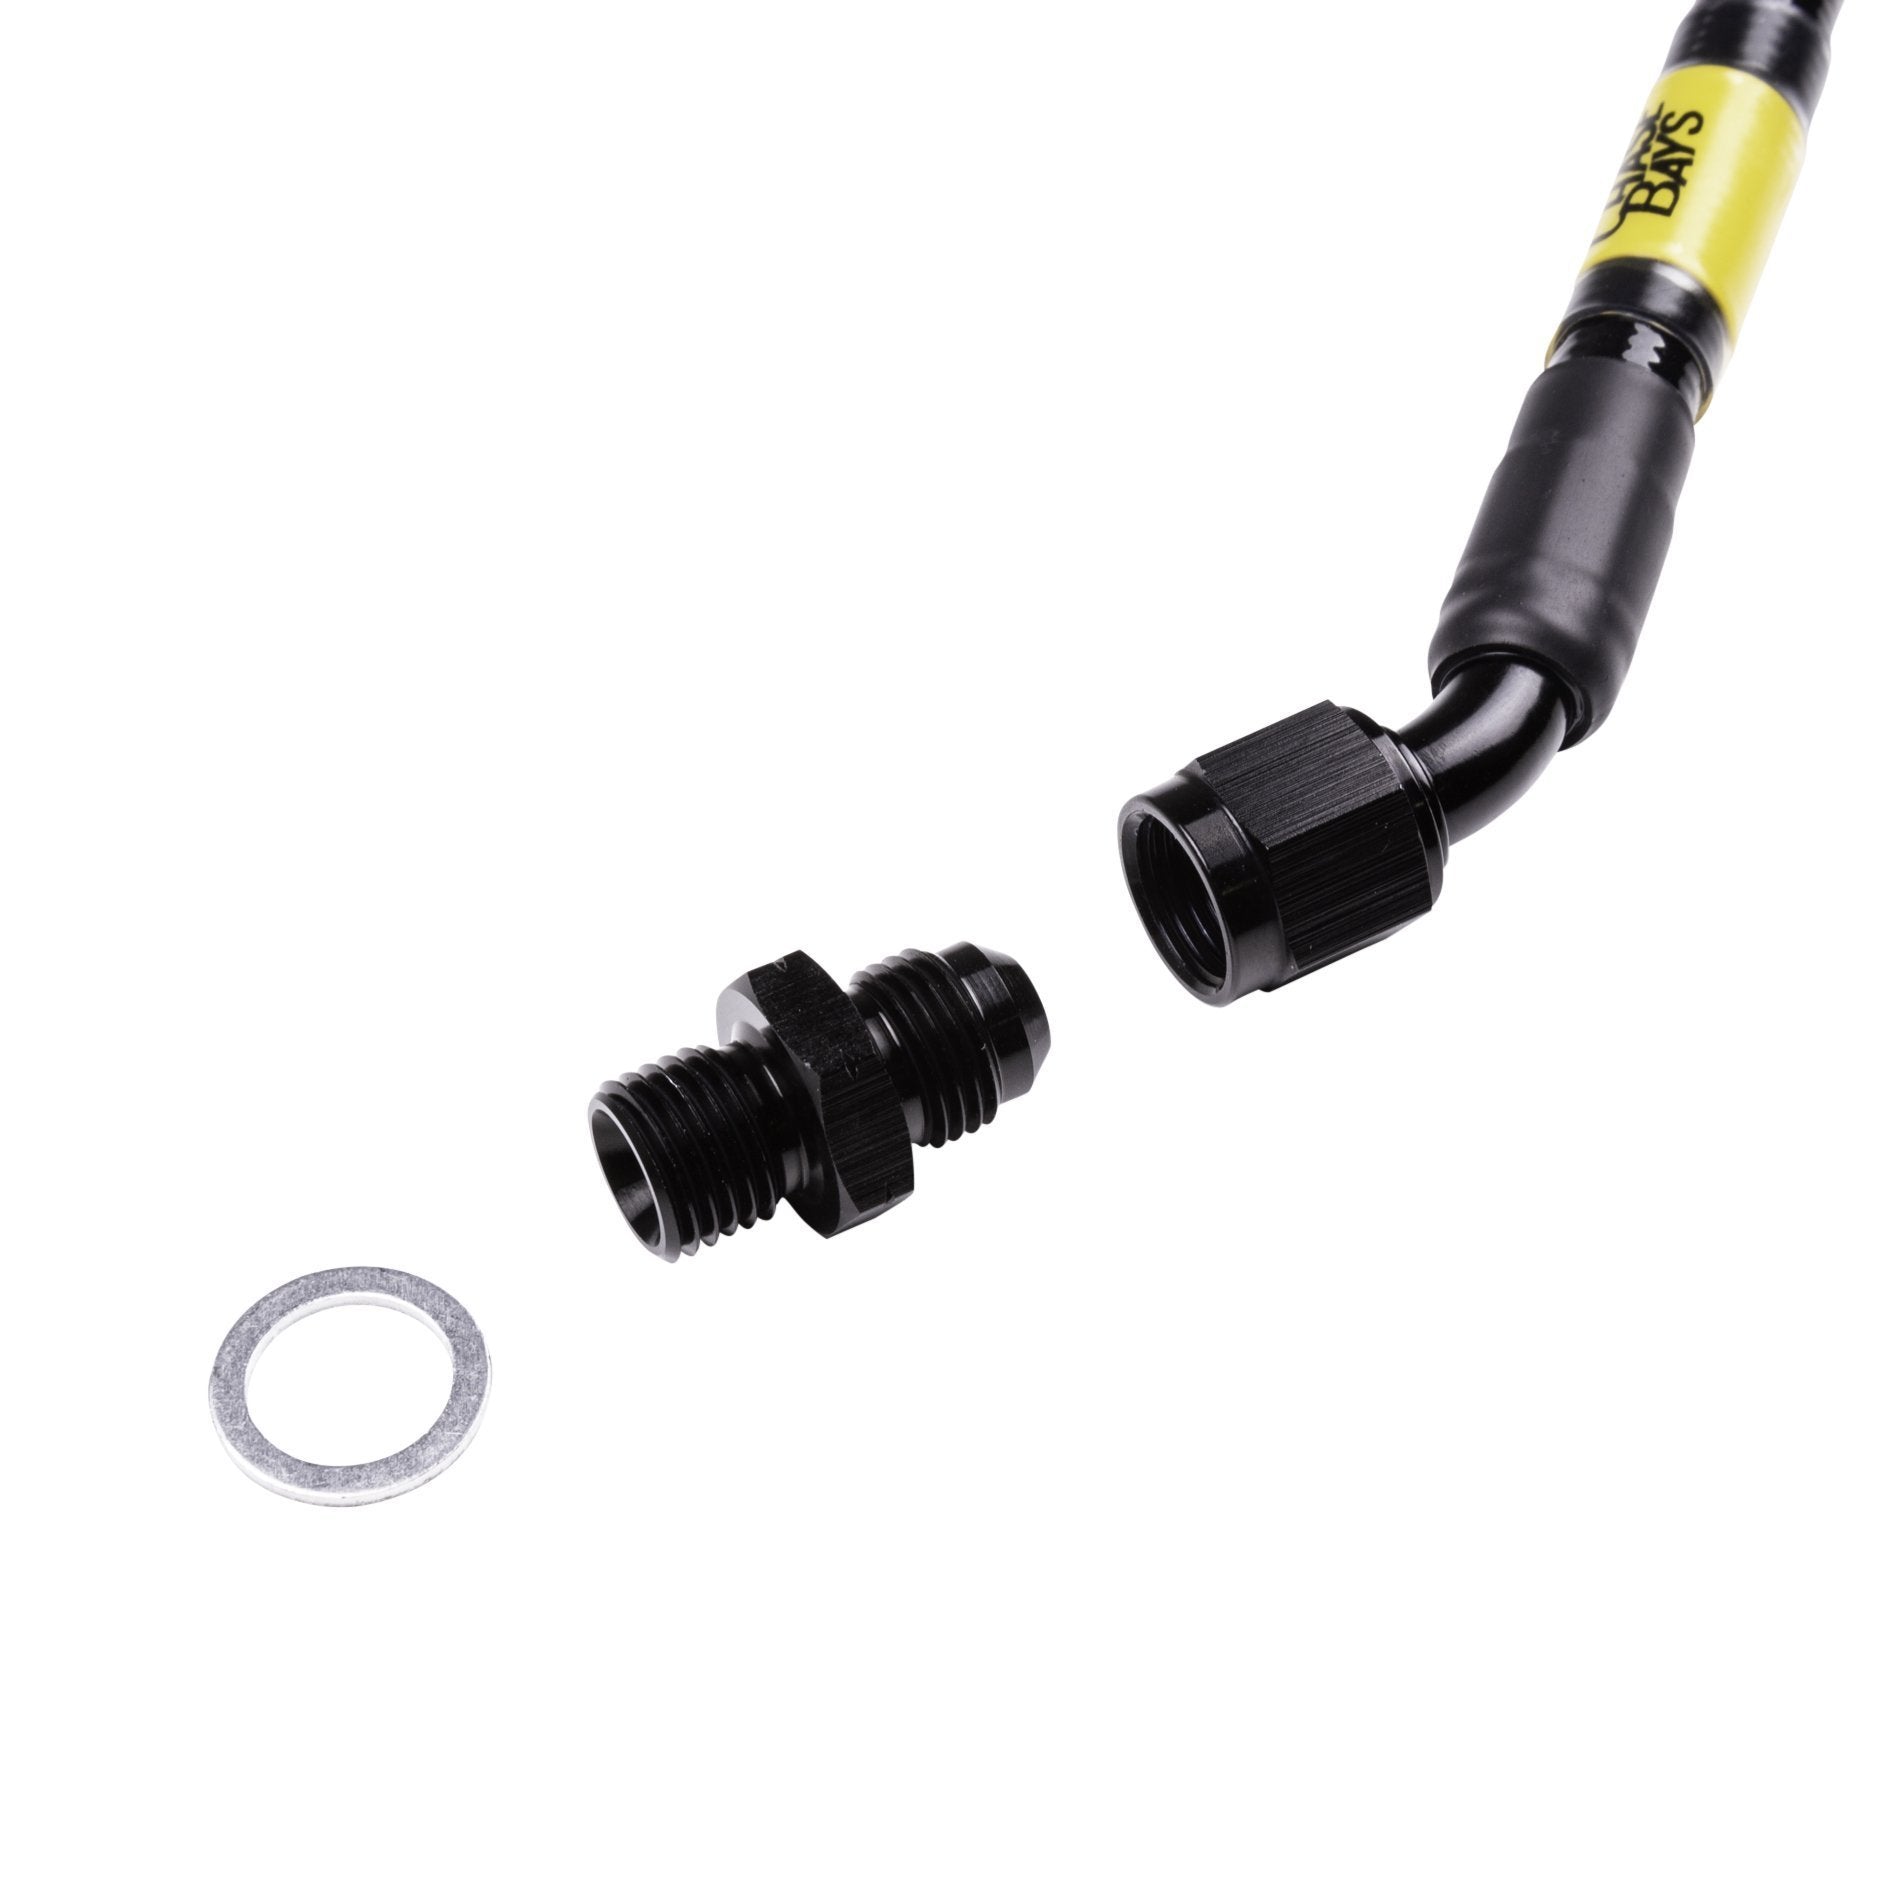 CHASE BAYS BMW E36 high pressure hose power steering with BMW engine